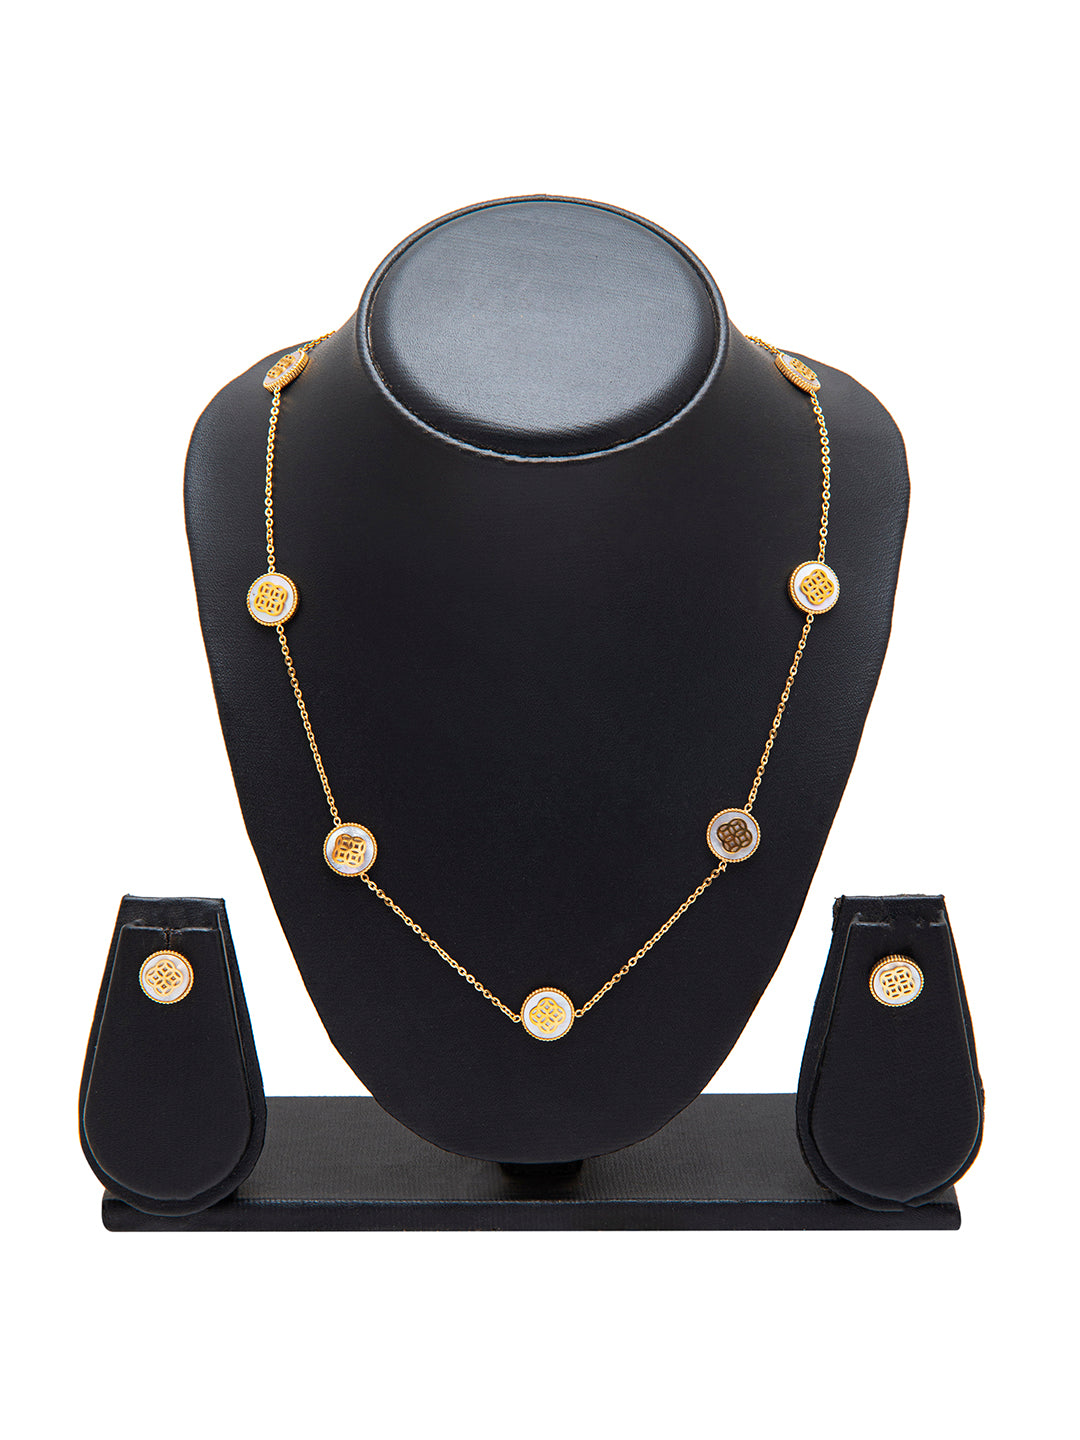 Chanel Dice Necklace - BagButler